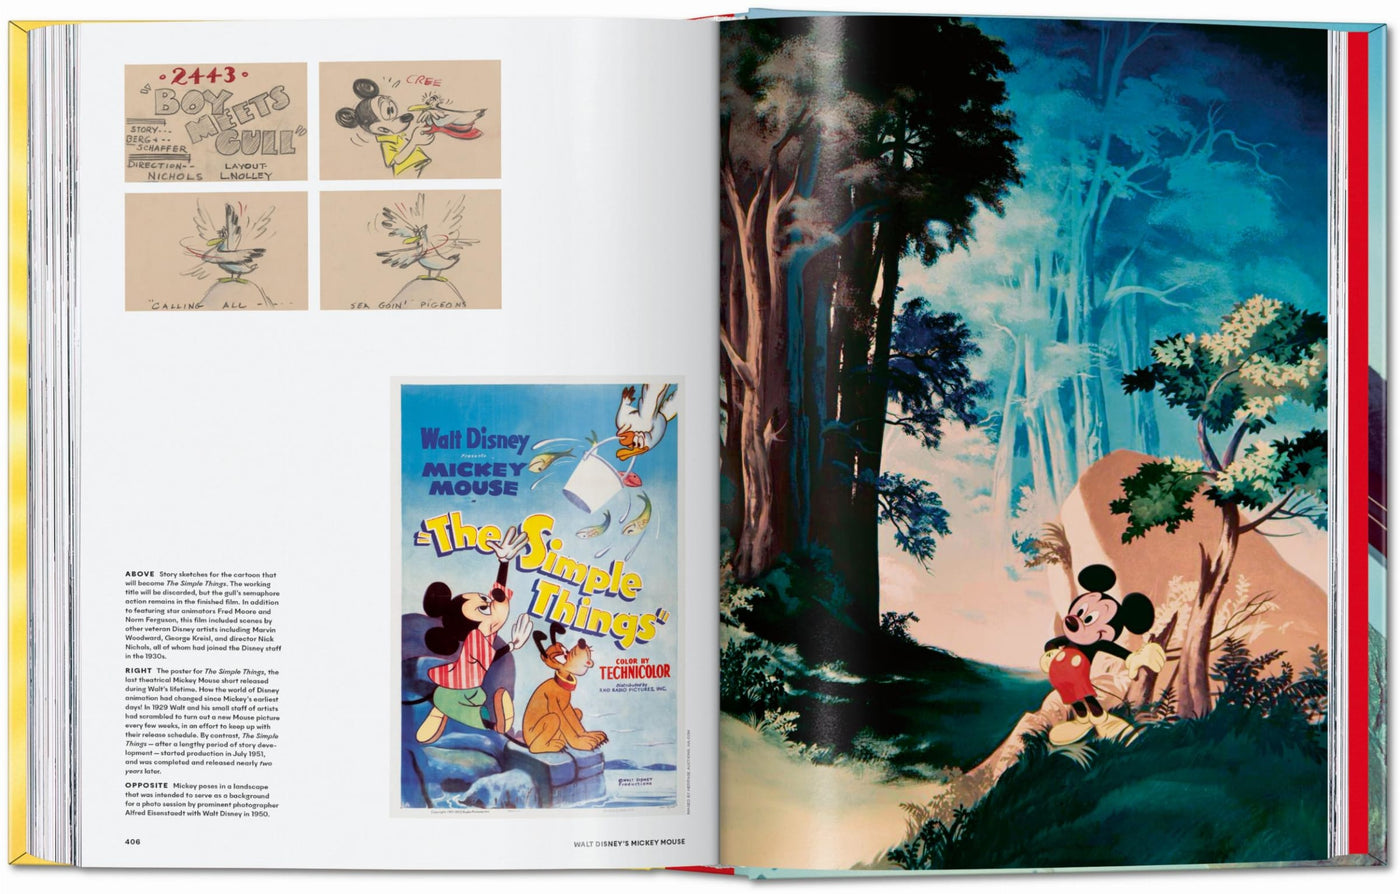 Walt Disney's Mickey Mouse The Ultimate History XL